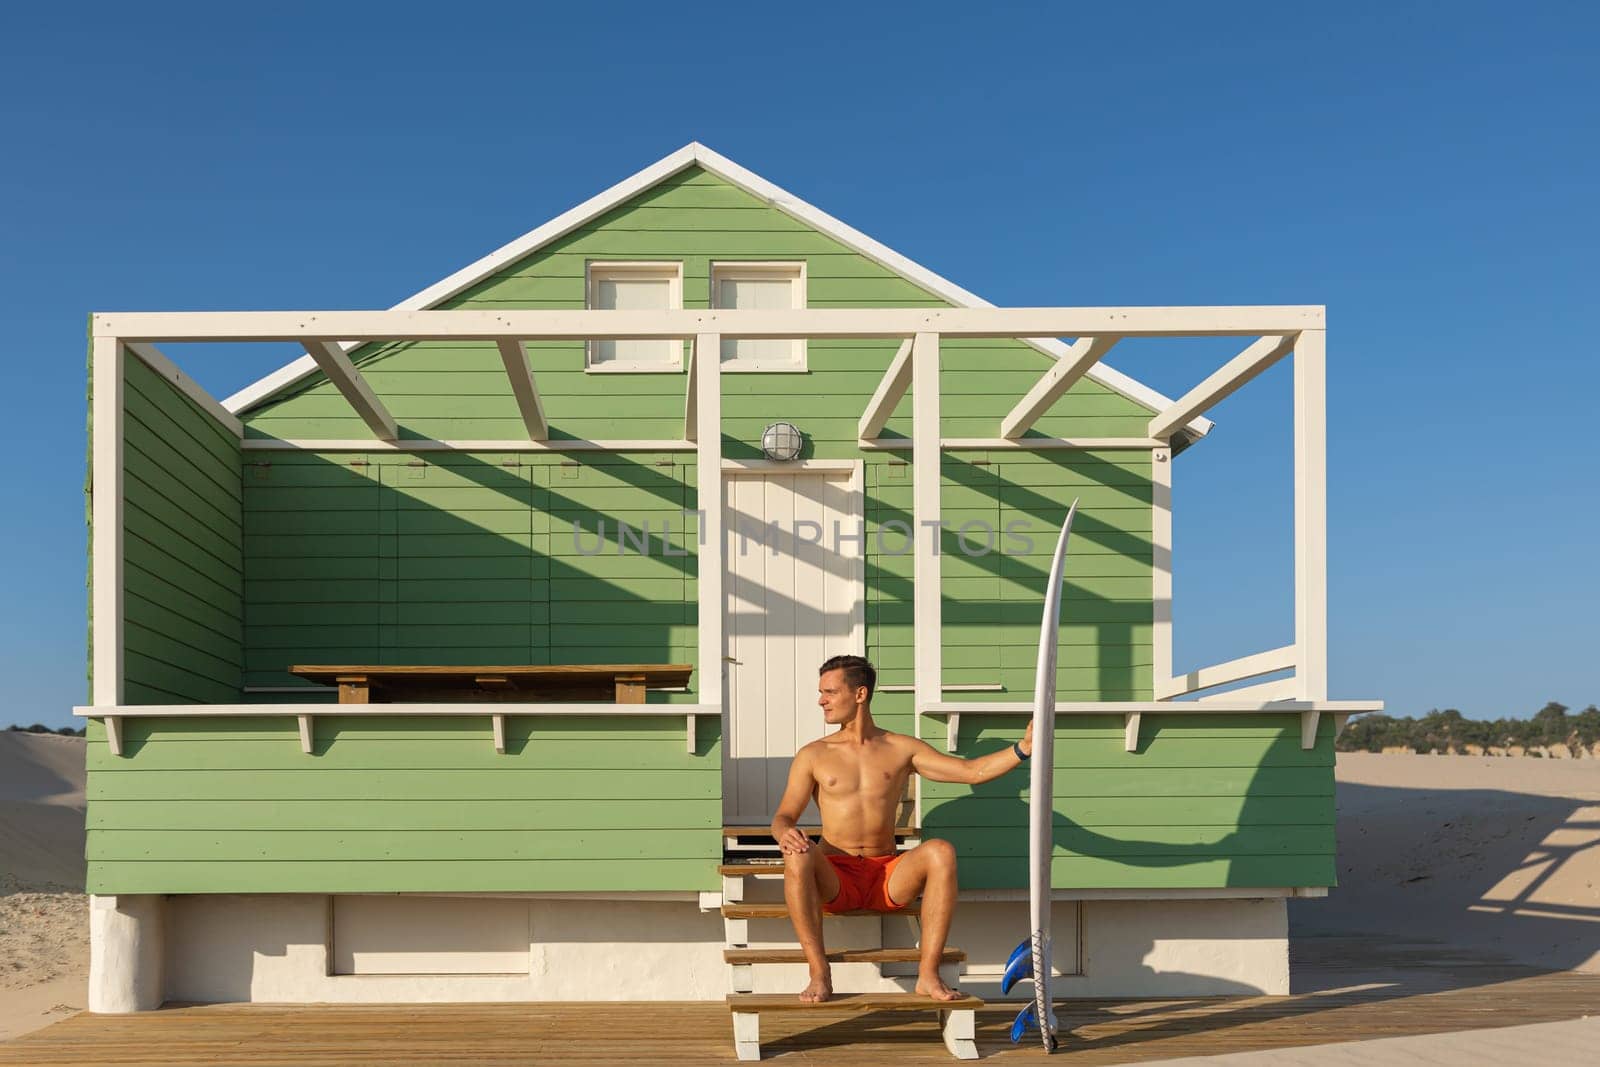 A man surfer sits on the stairs at a shore house on the beach. Mid shot